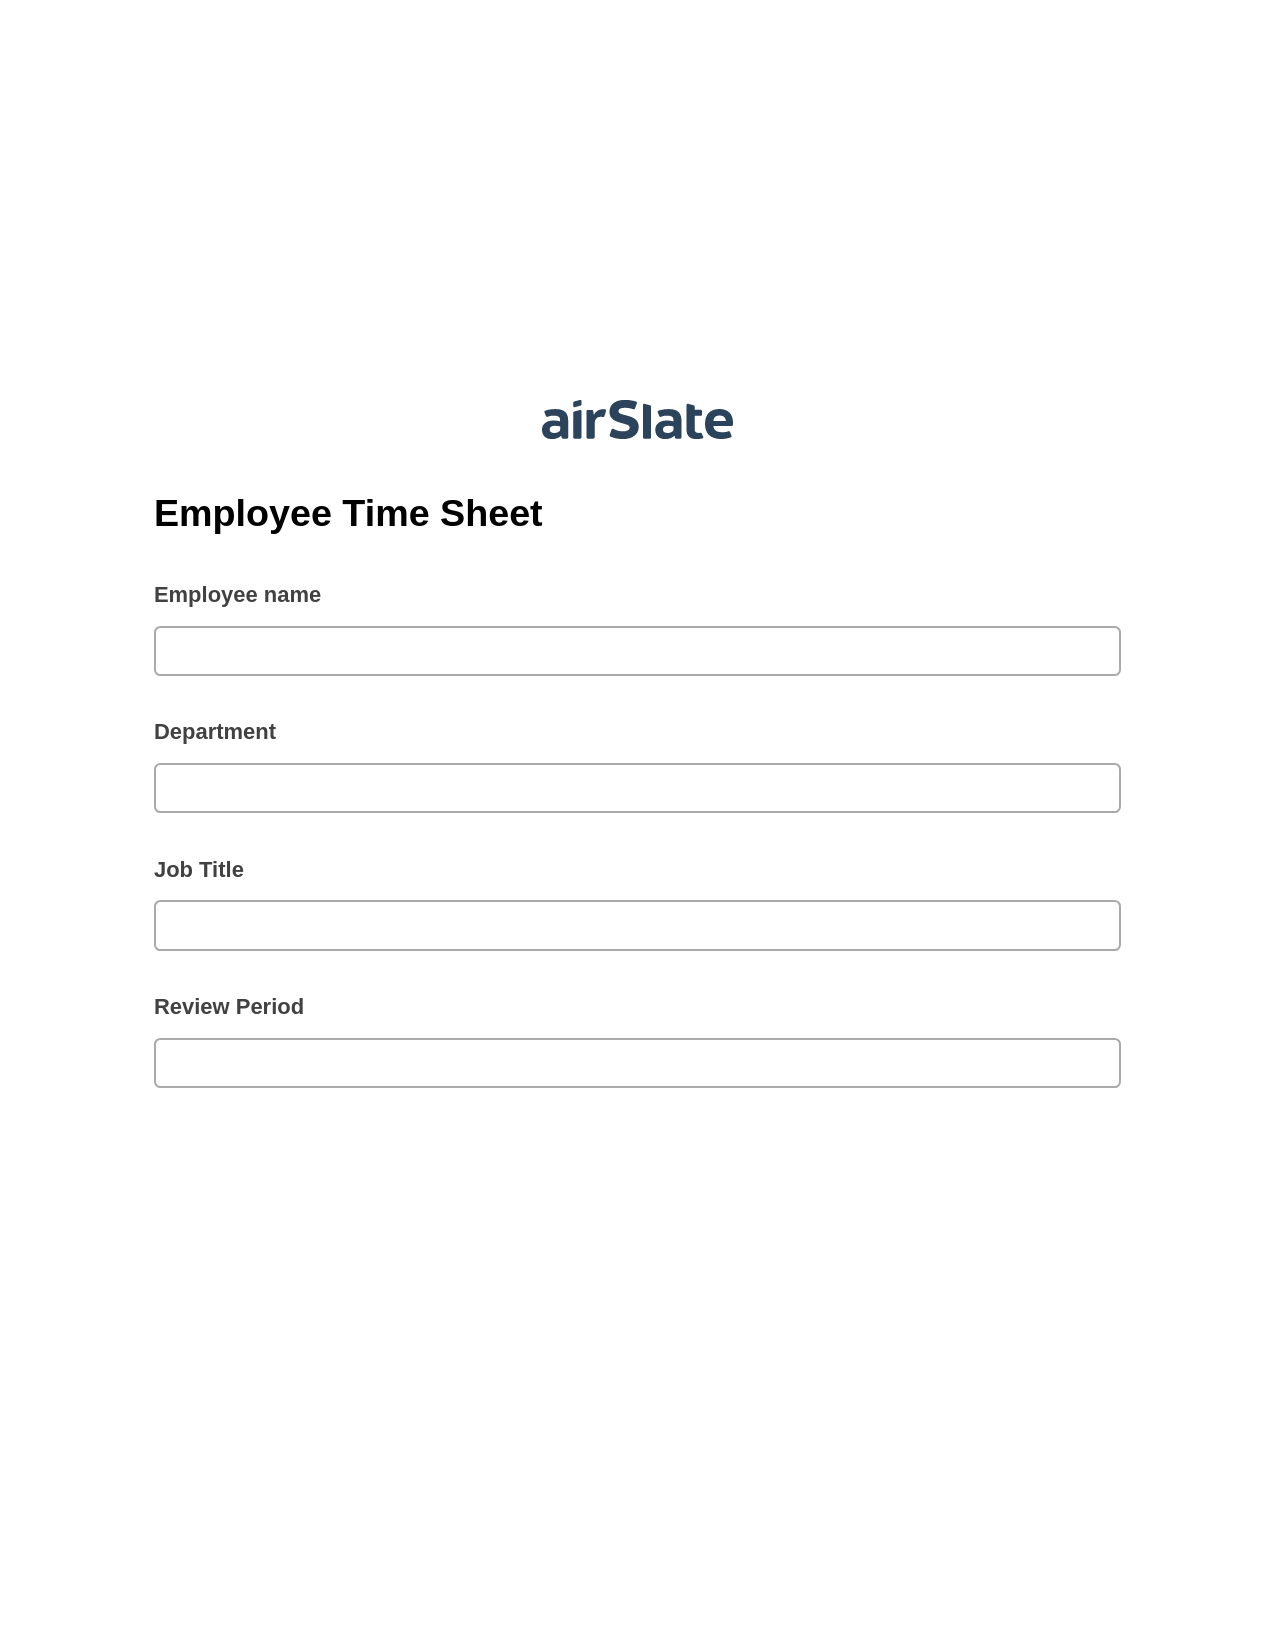 Employee Time Sheet Pre-fill from CSV File Bot, Create slate addon, Archive to Google Drive Bot